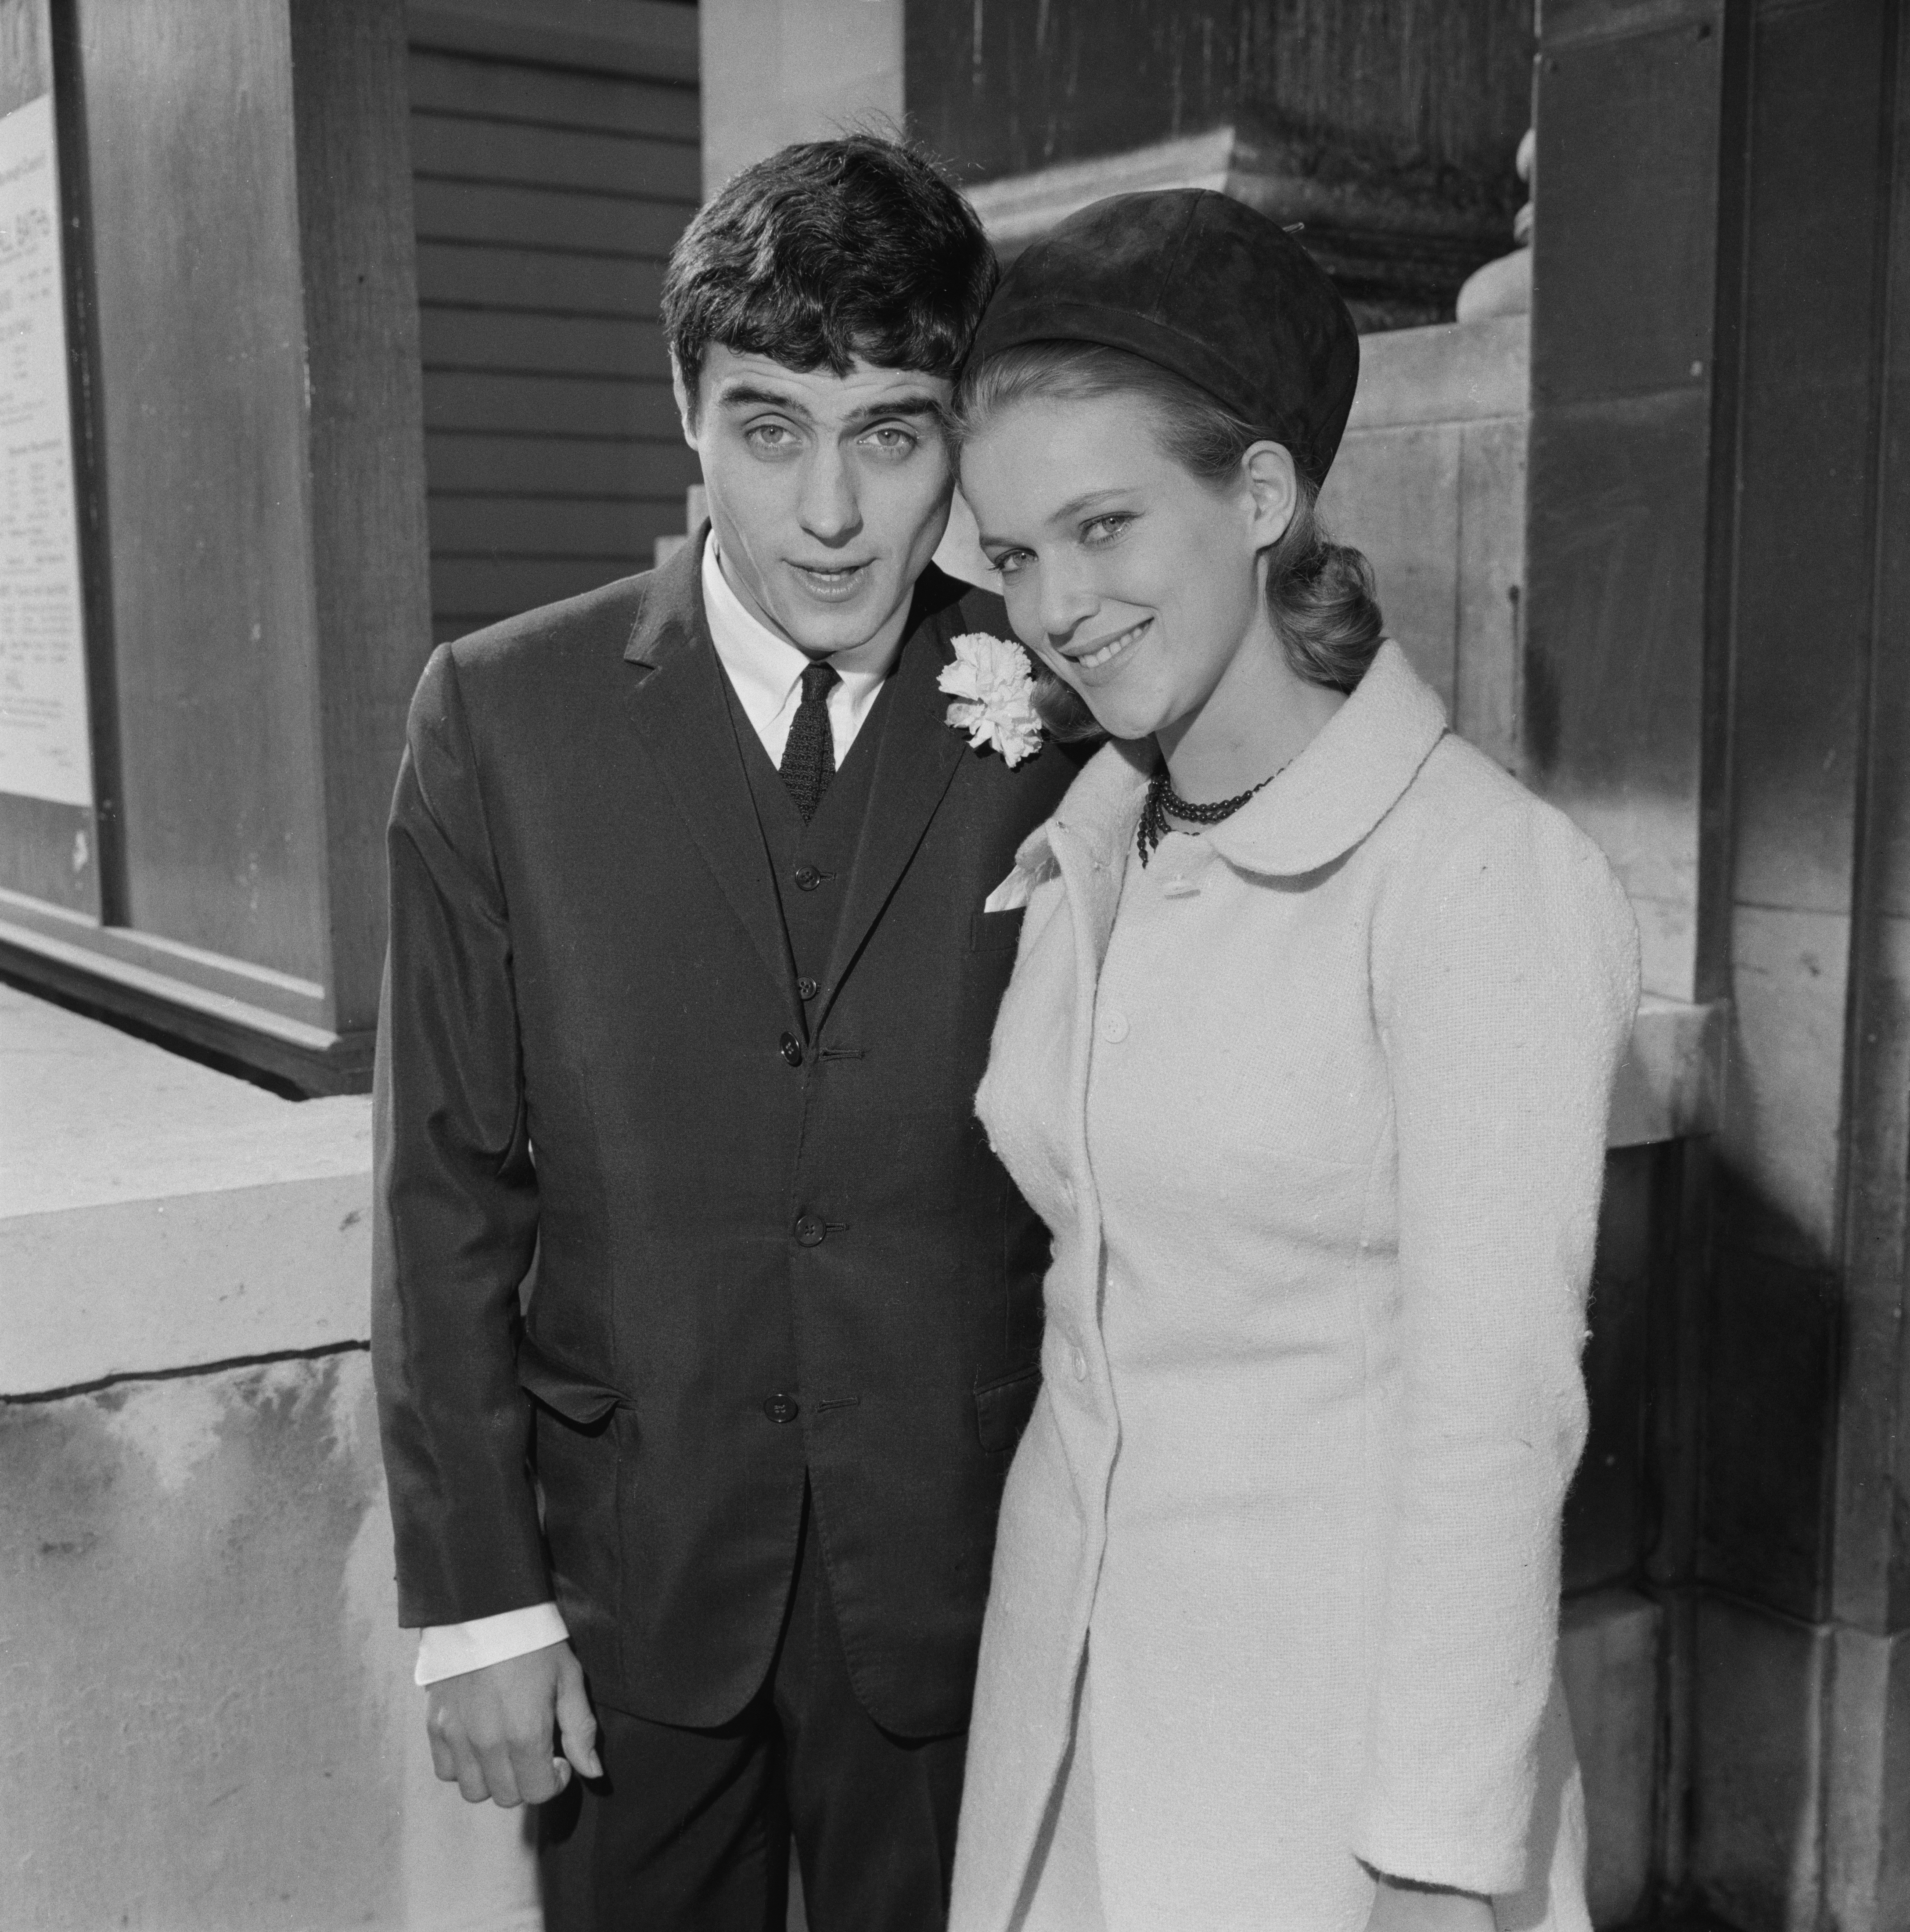 Ian McShane photographed with his actress wife, Suzan Farmer on October 5, 1964 in the United Kingdom | Source: Getty Images